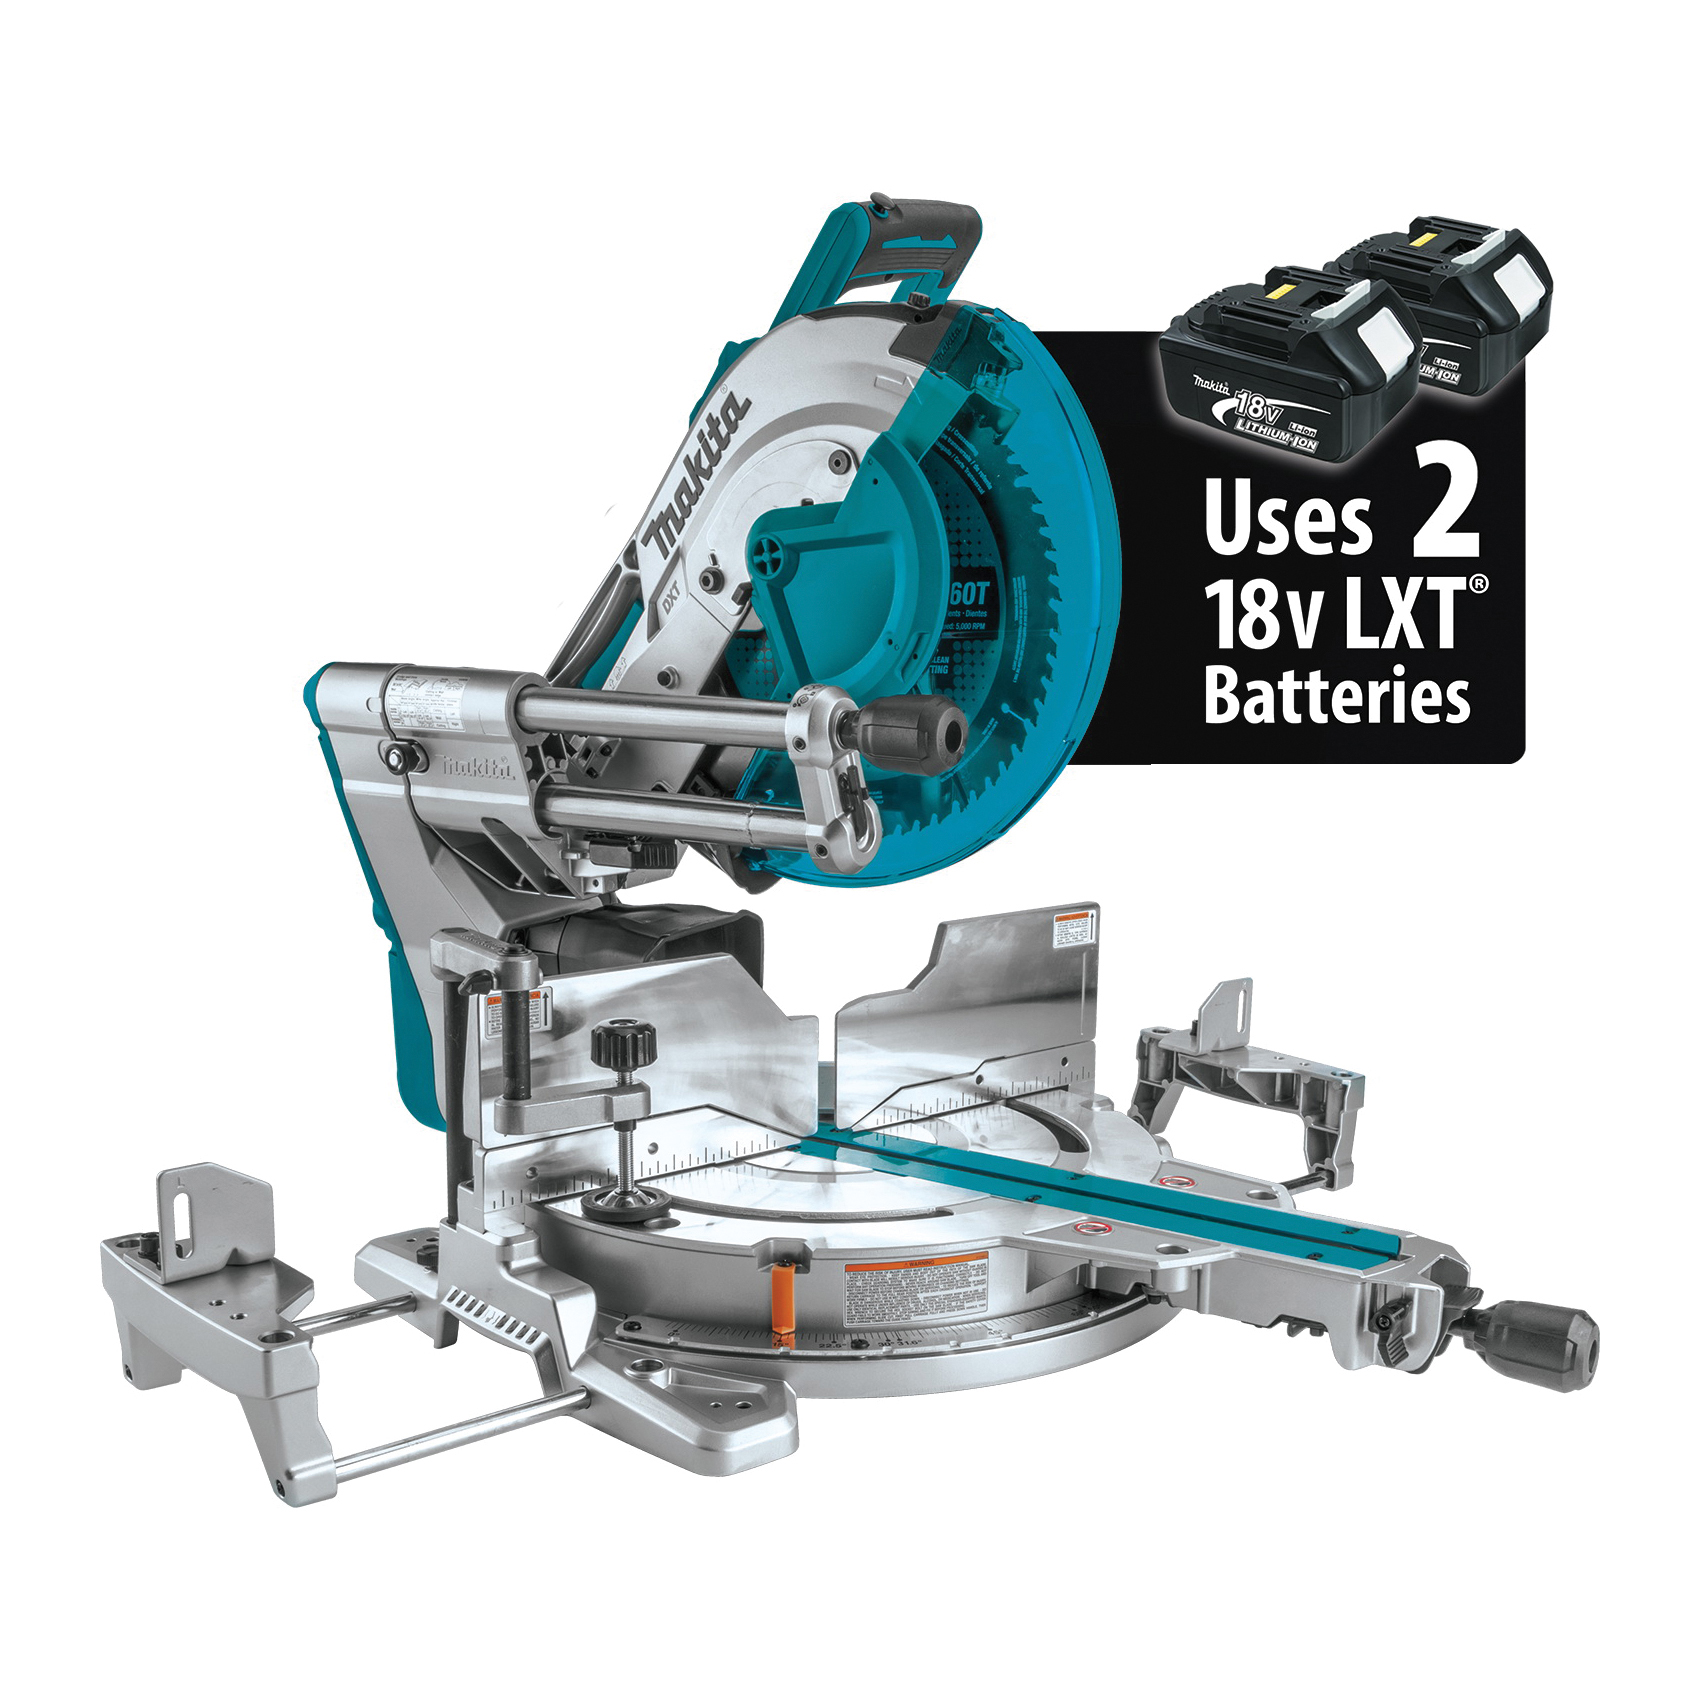 Makita LXT XSL07Z Miter Saw with Laser, Battery, 12 in Dia Blade, 4400 rpm Speed, 0 to 60 deg Max Miter Angle